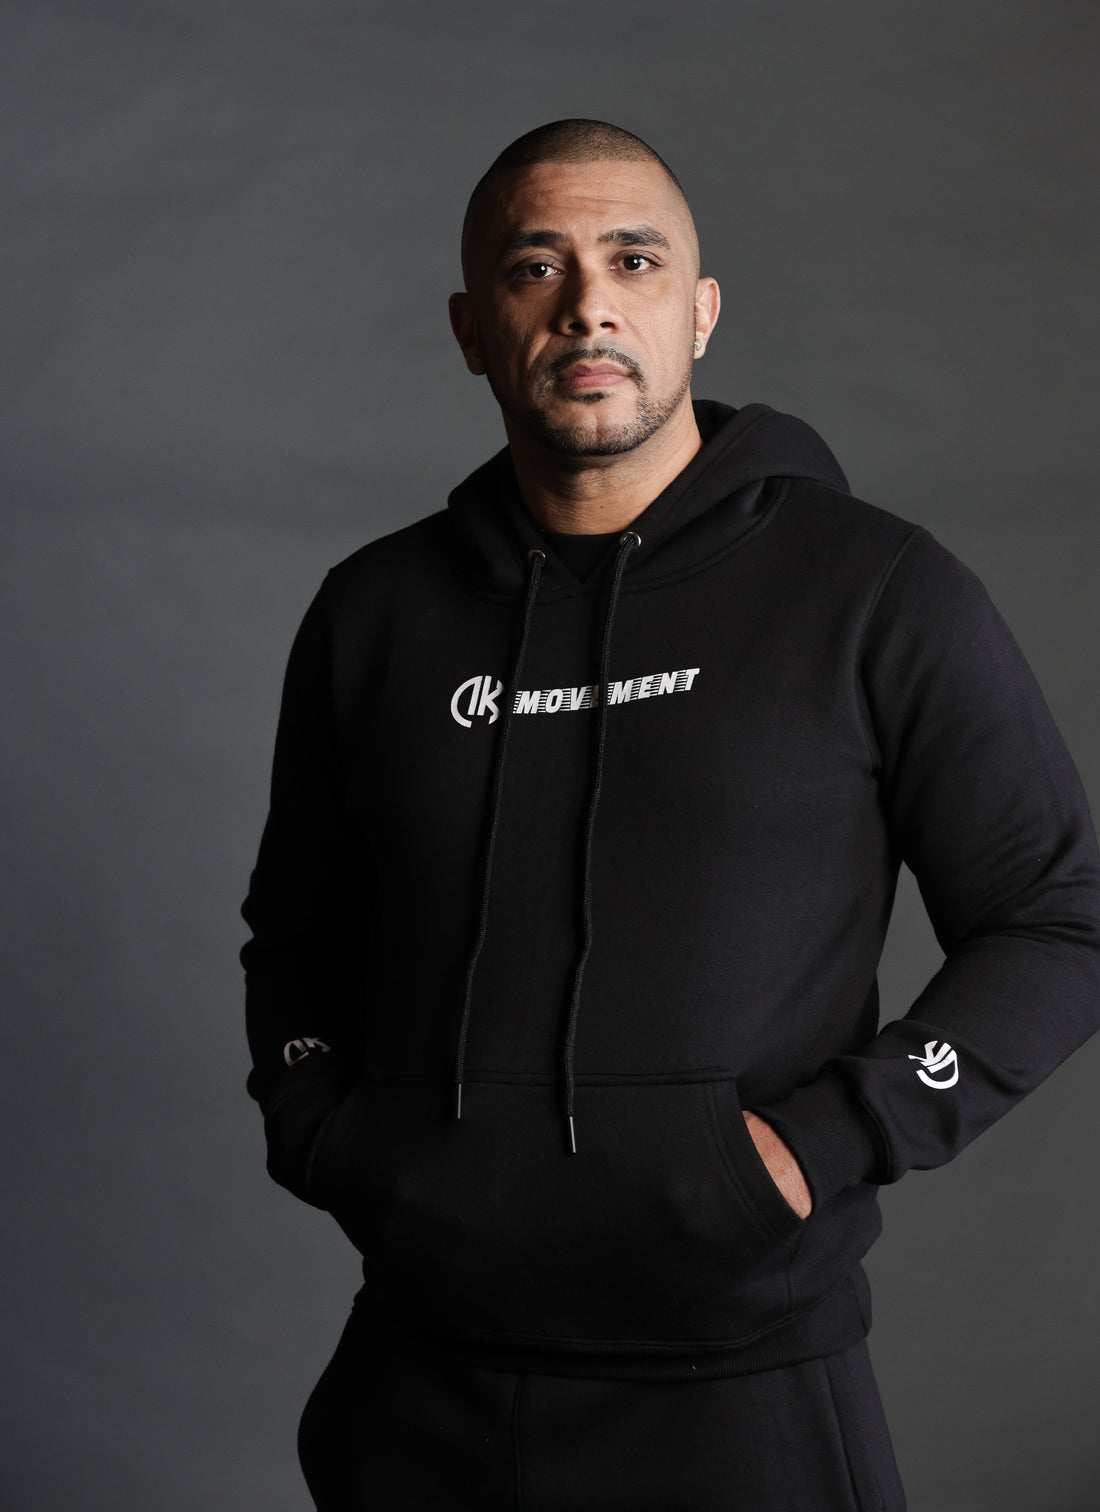 DK Movement Hoodies & Track Jackets: Versatile Essentials for Your Streetwear and Athleisure Wardrobe